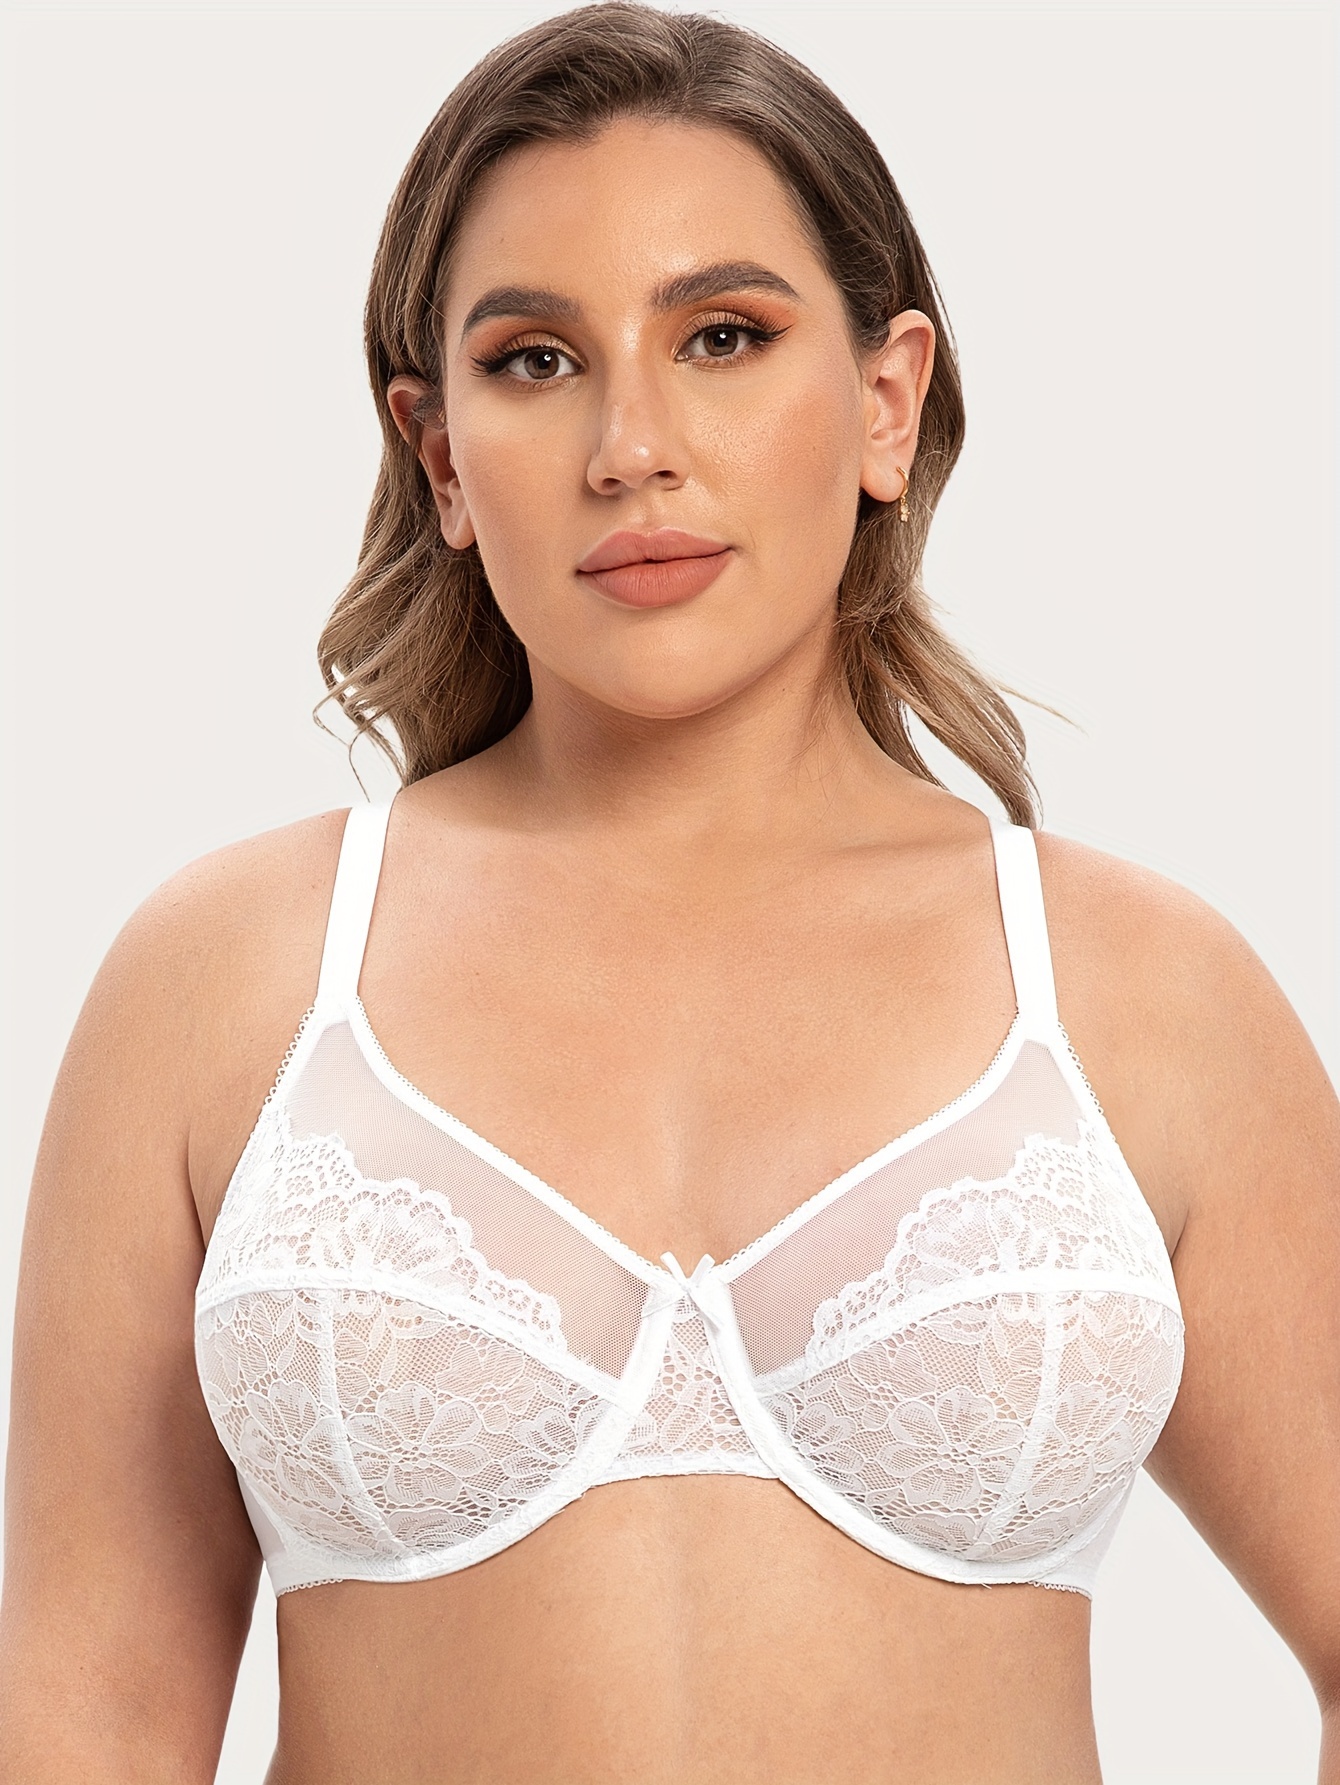 Women's Full Coverage Bra Underwired No Padding Floral Lace Plus Size 